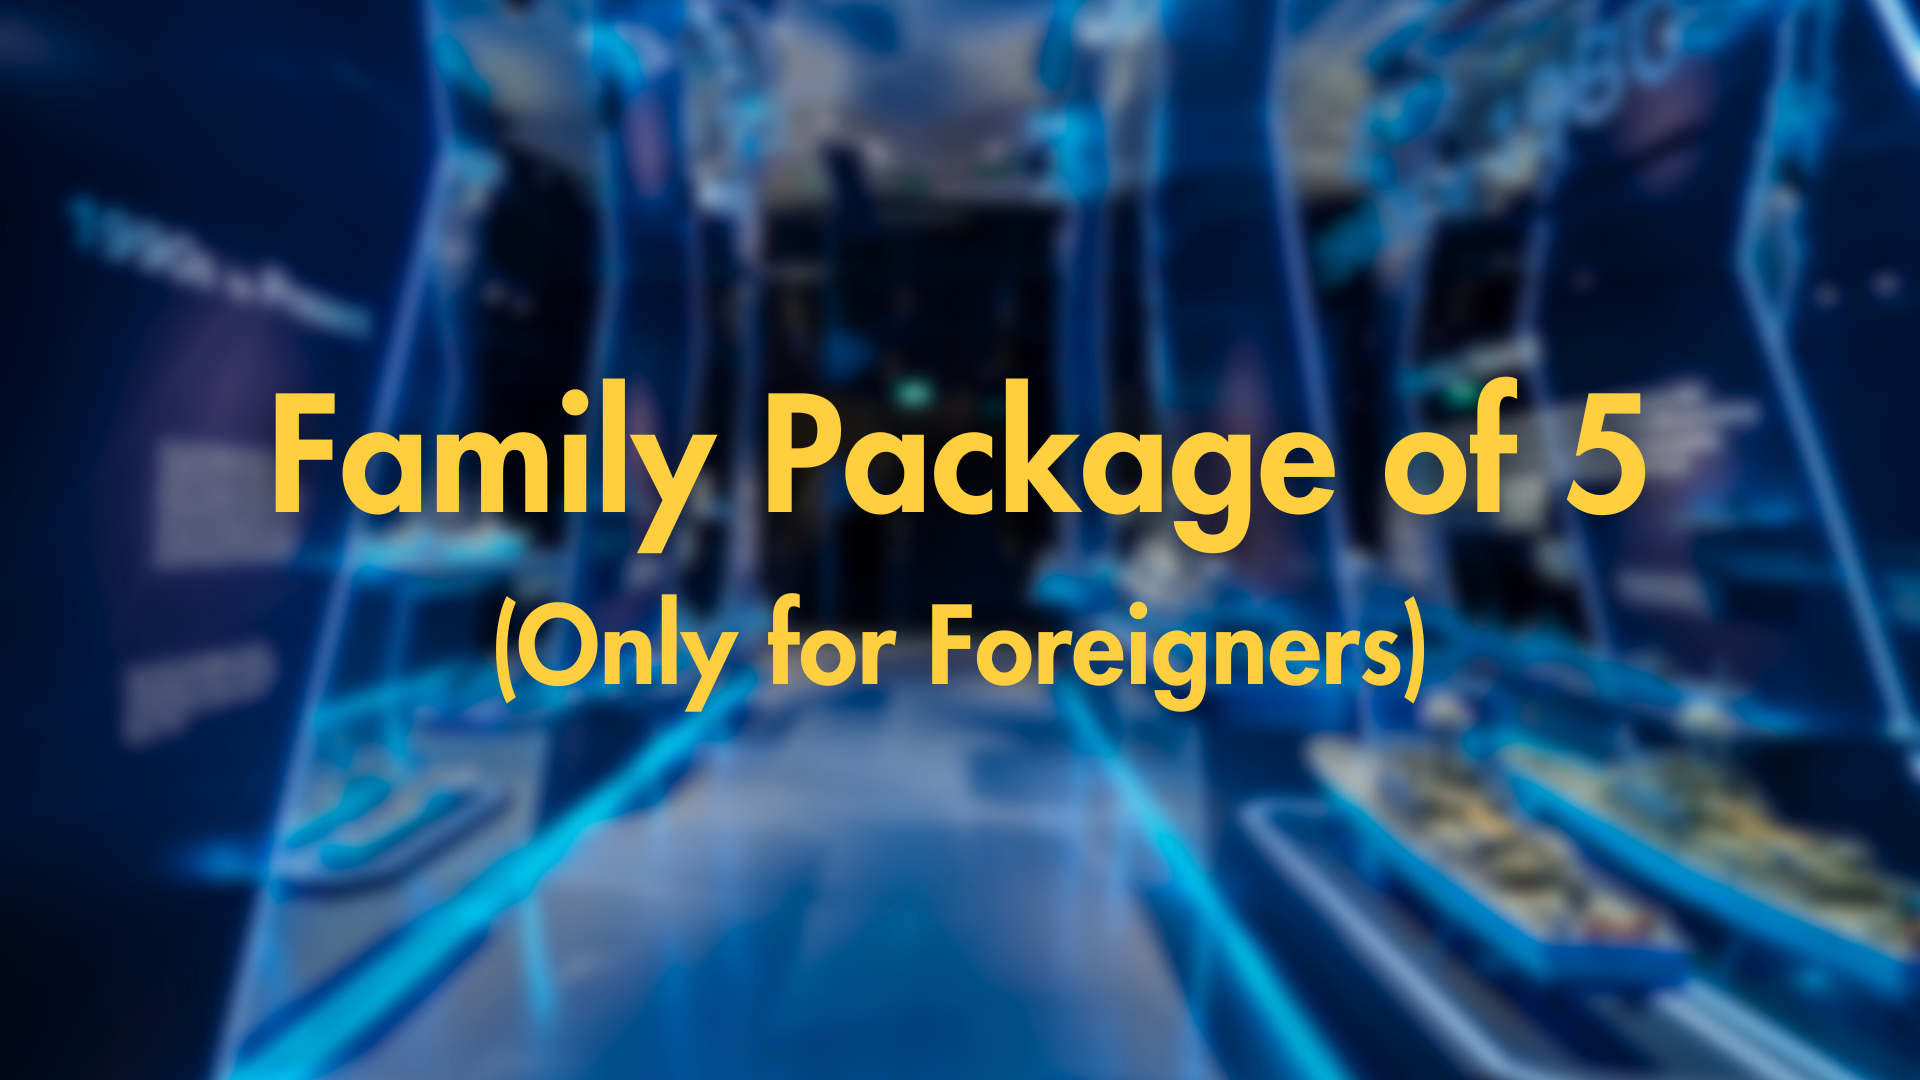 Family Package of 5 (Only for Foreigners)